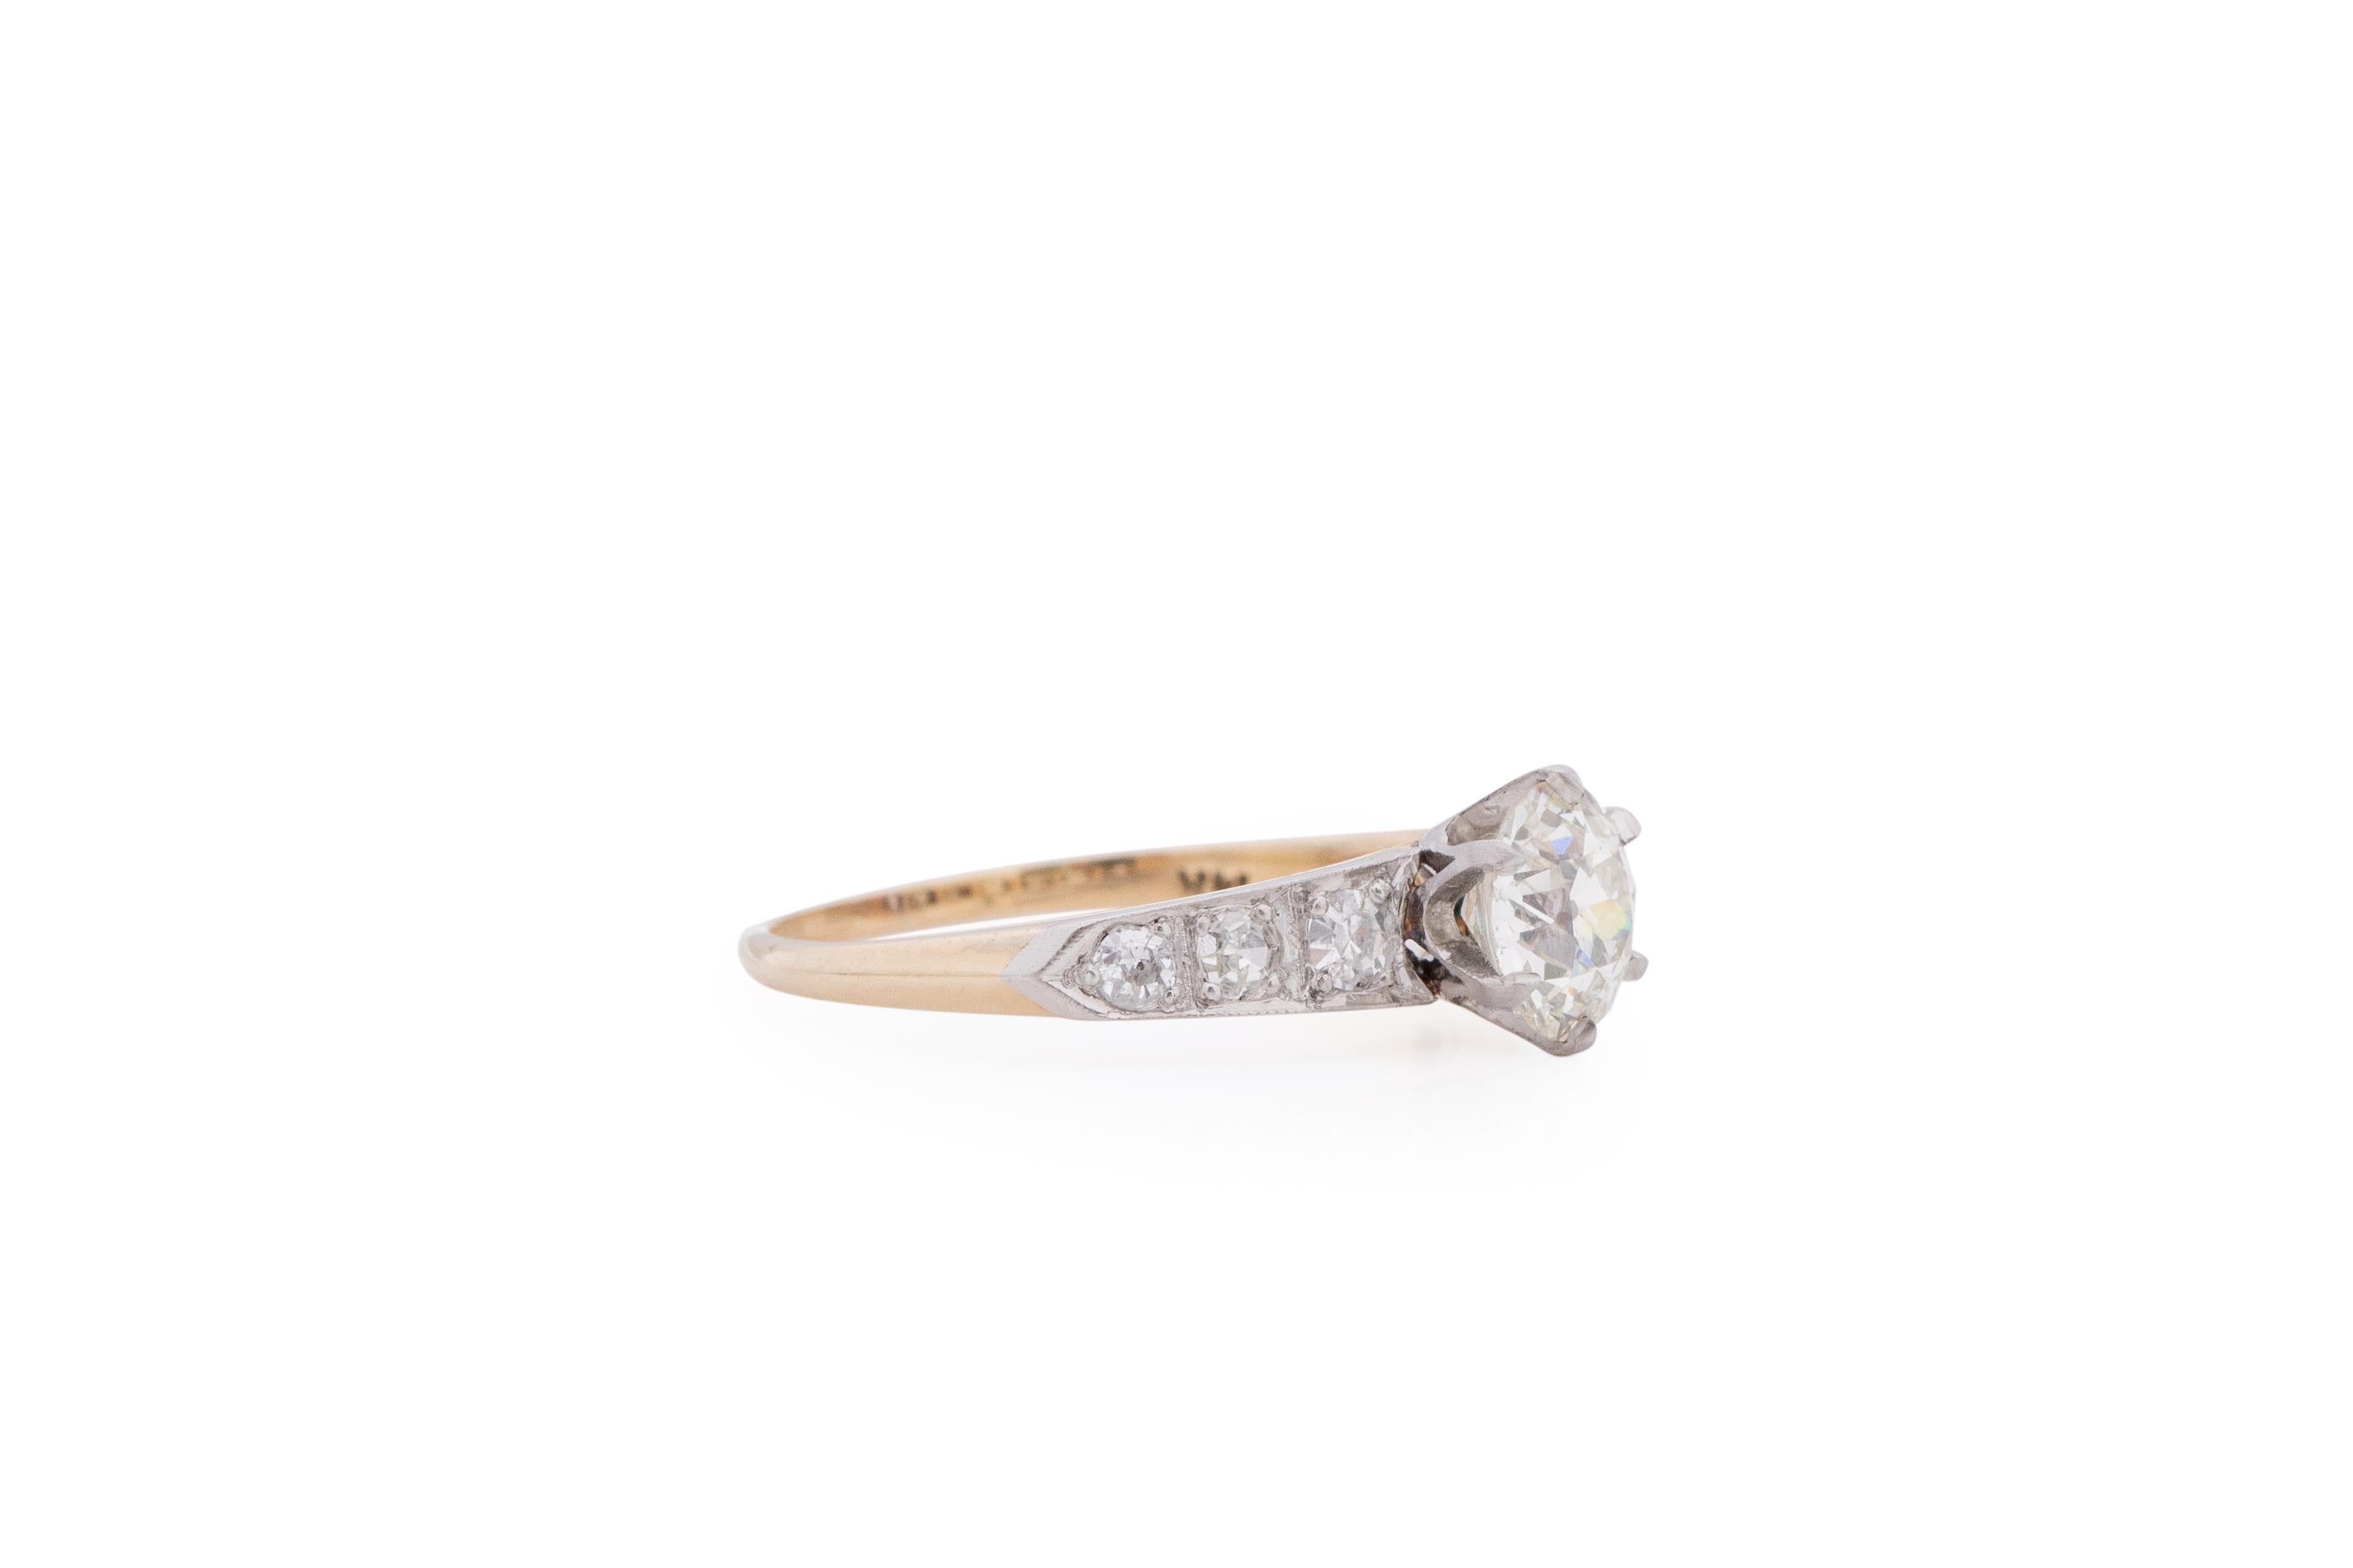 Item Details: 
Ring Size: 6.75
Metal Type: 14 Karat Yellow Gold & Platinum [Hallmarked, and Tested]
Weight: 2.3 grams

Center Diamond Details:
Weight: 1.00 carat
Cut: Old European brilliant
Color: L/M
Clarity: VS2
Measurements: 6.4mm x 4mm

Side